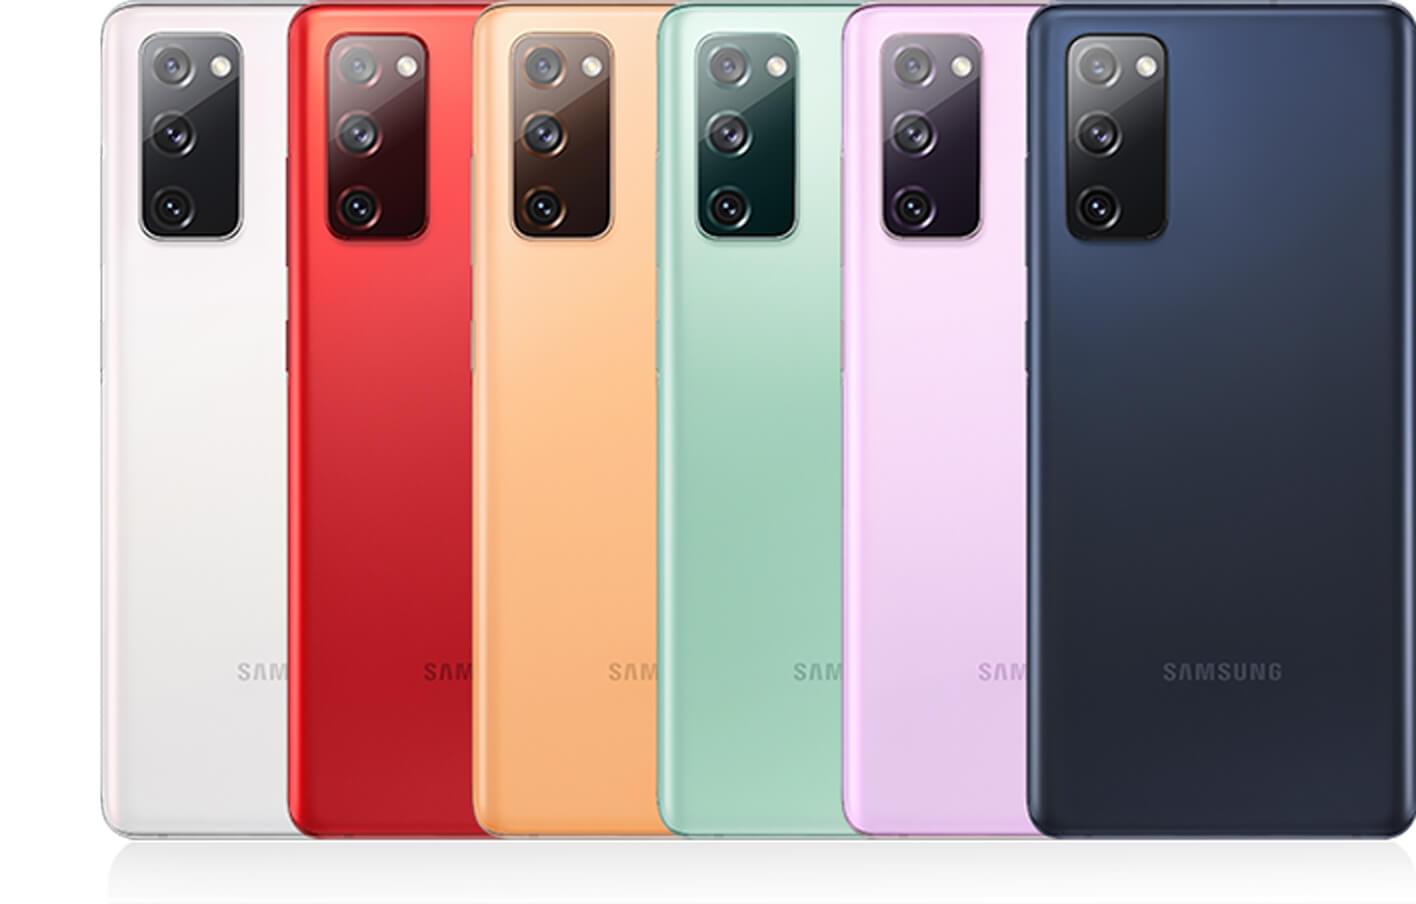 Rear view of Galaxy S20 FE 5G showing all colours